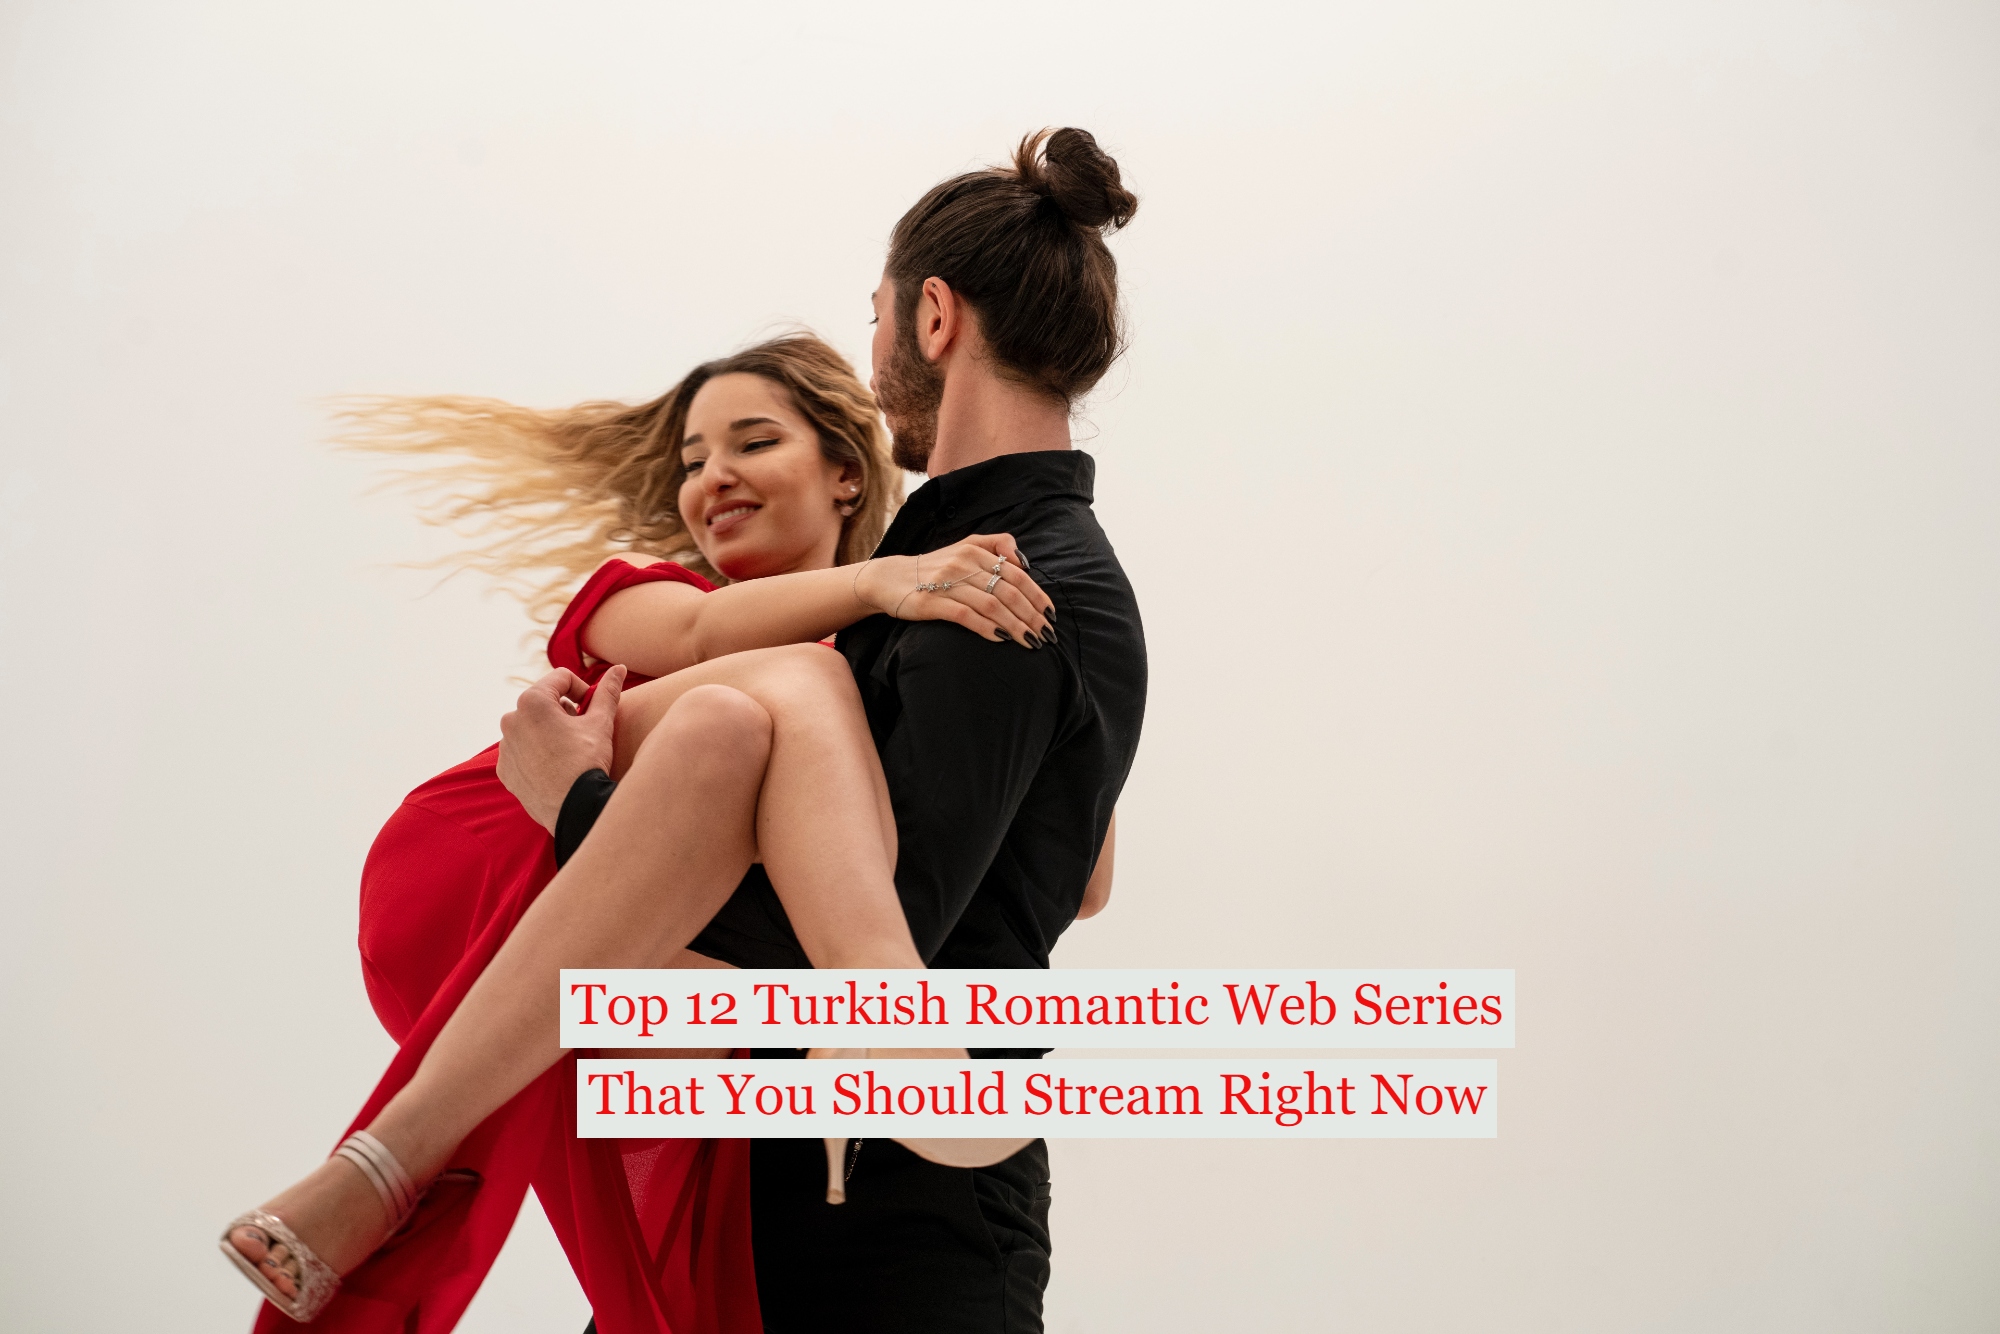 Top 12 Turkish Romantic Web Series That You Should Stream Right Now